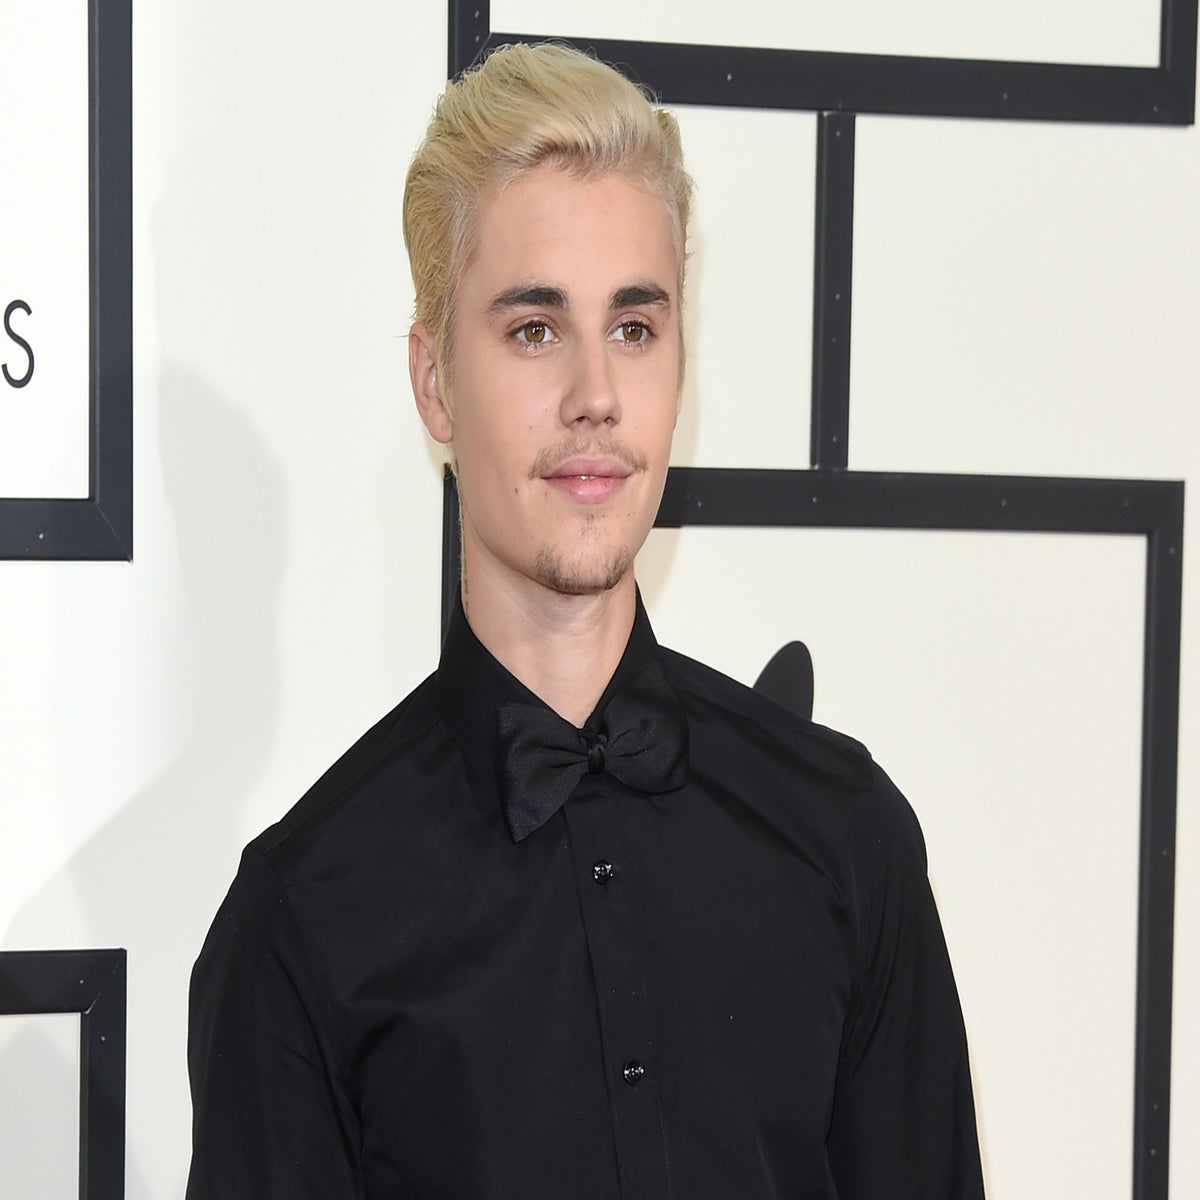 Justin Bieber accused of cultural appropriation over hairstyle, Fashion